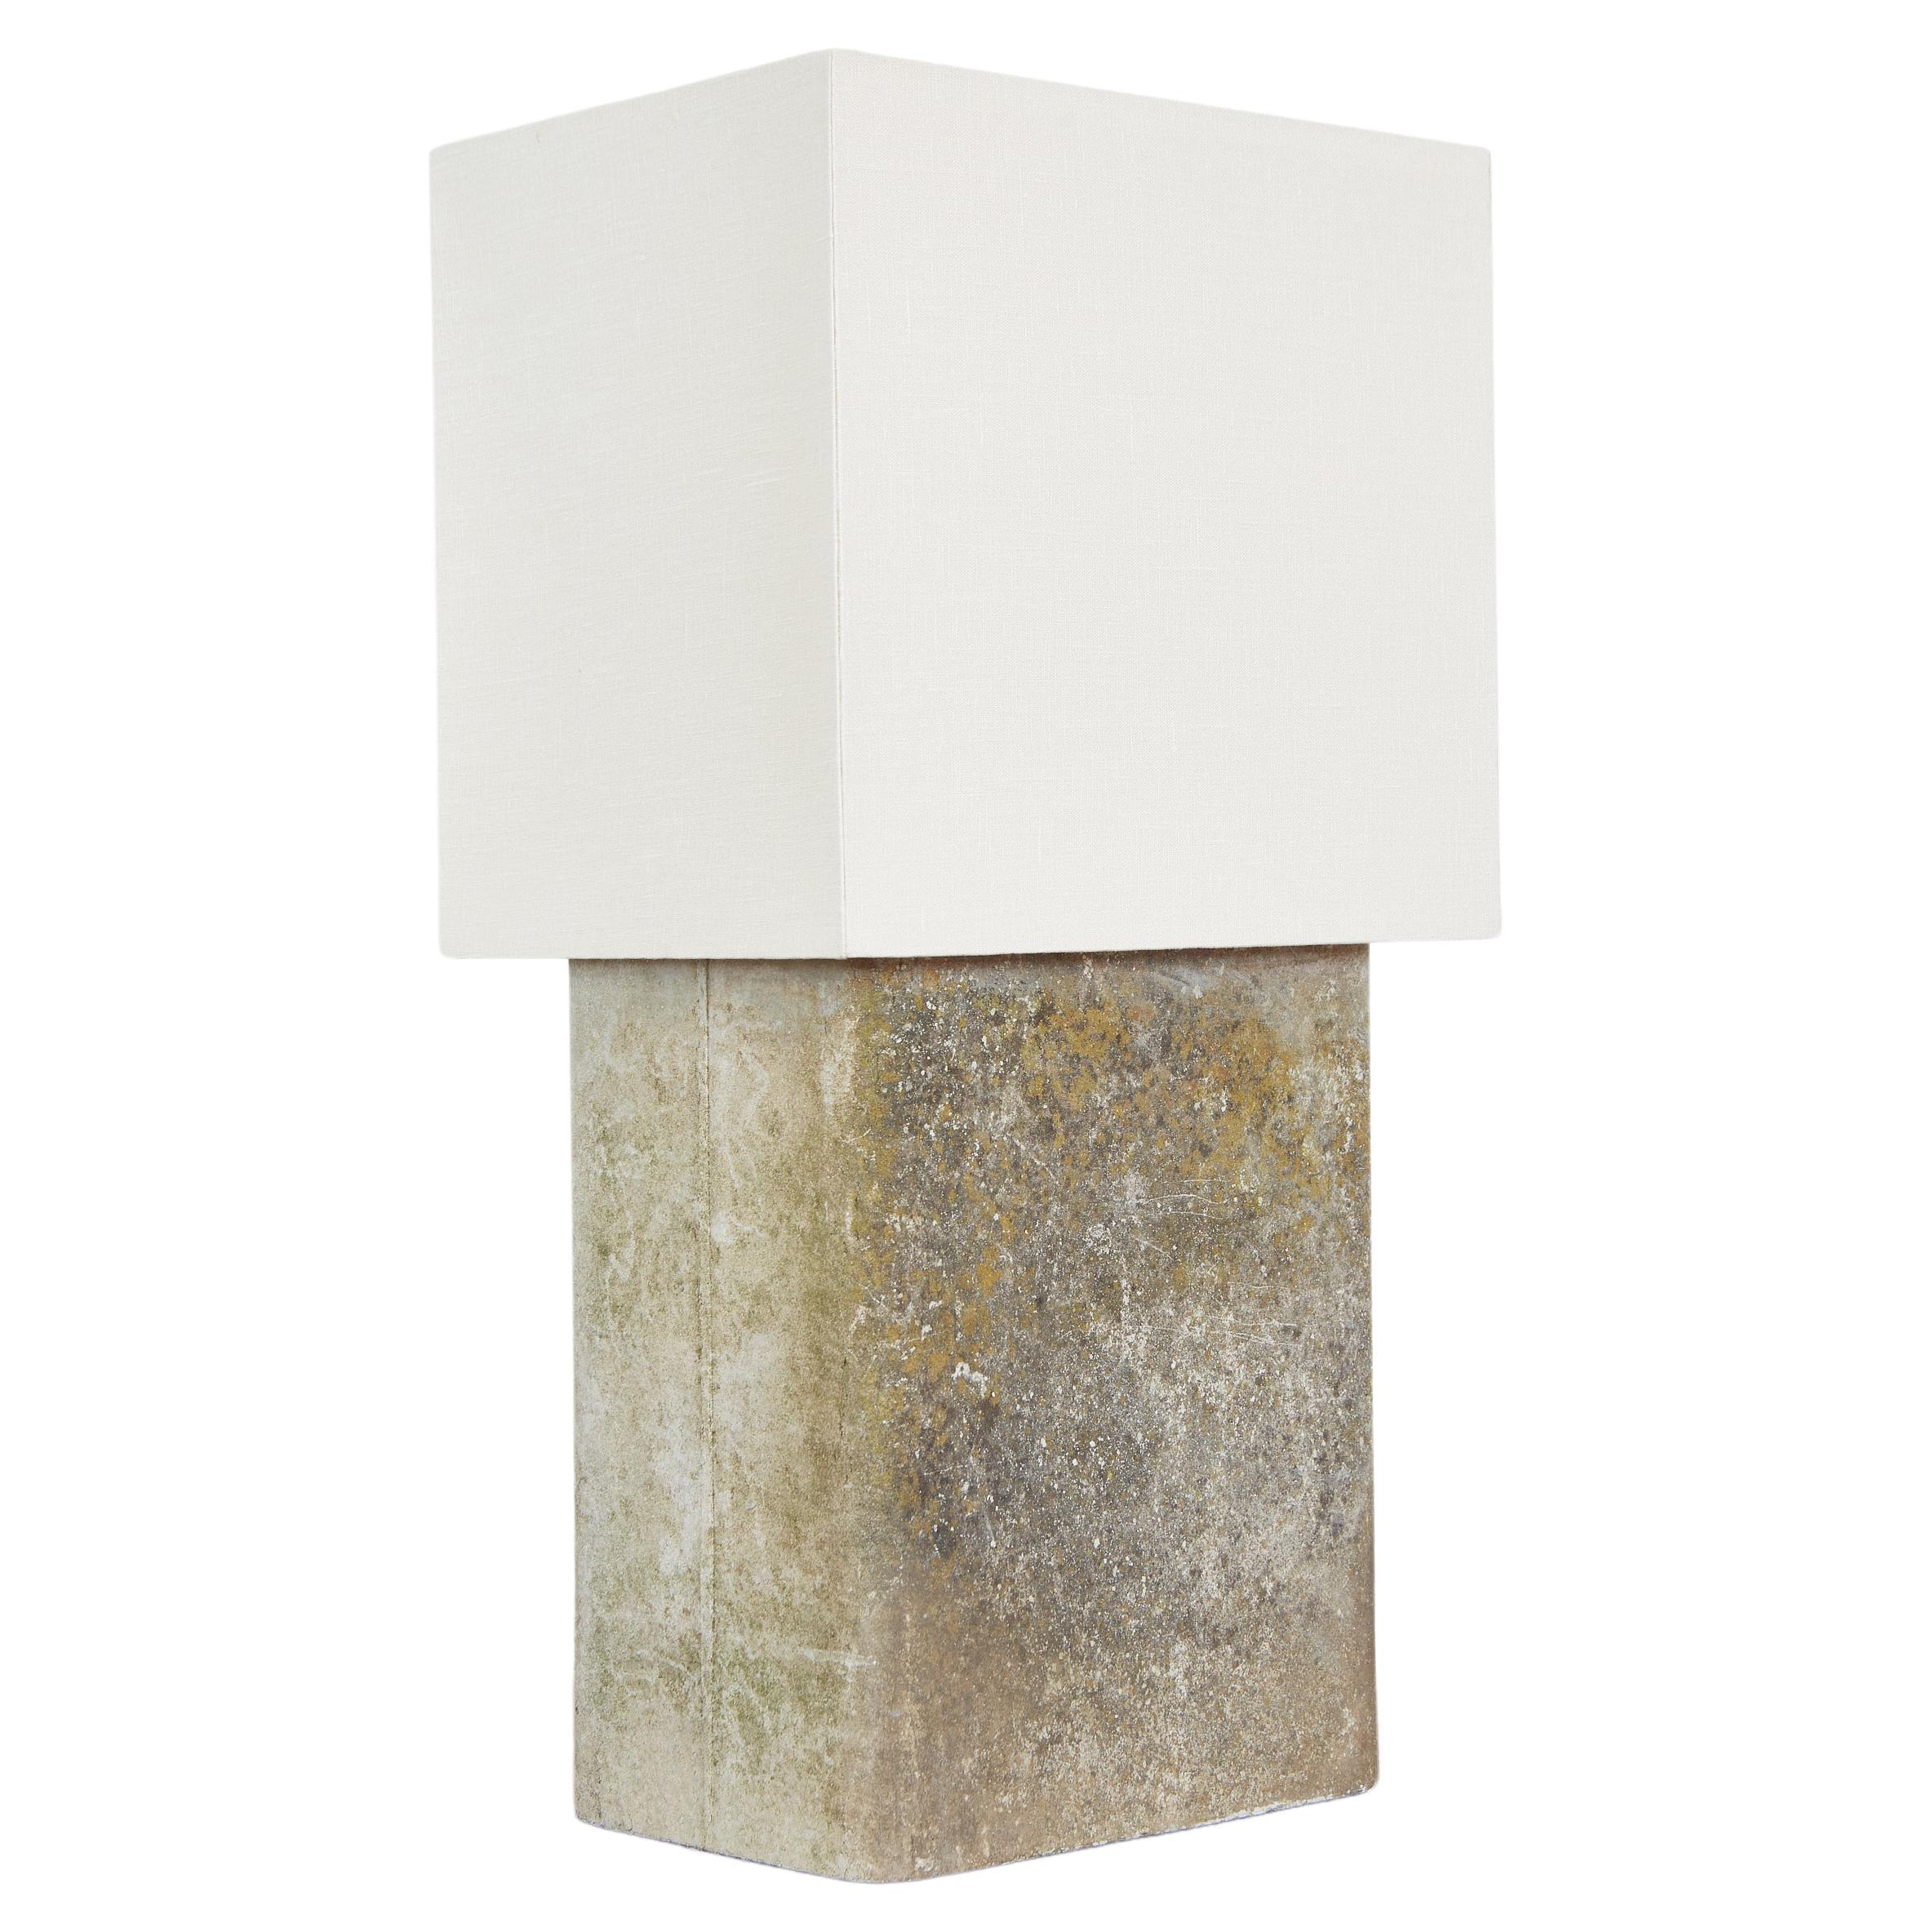 Gigantic Willy Guhl Table Lamp For Sale